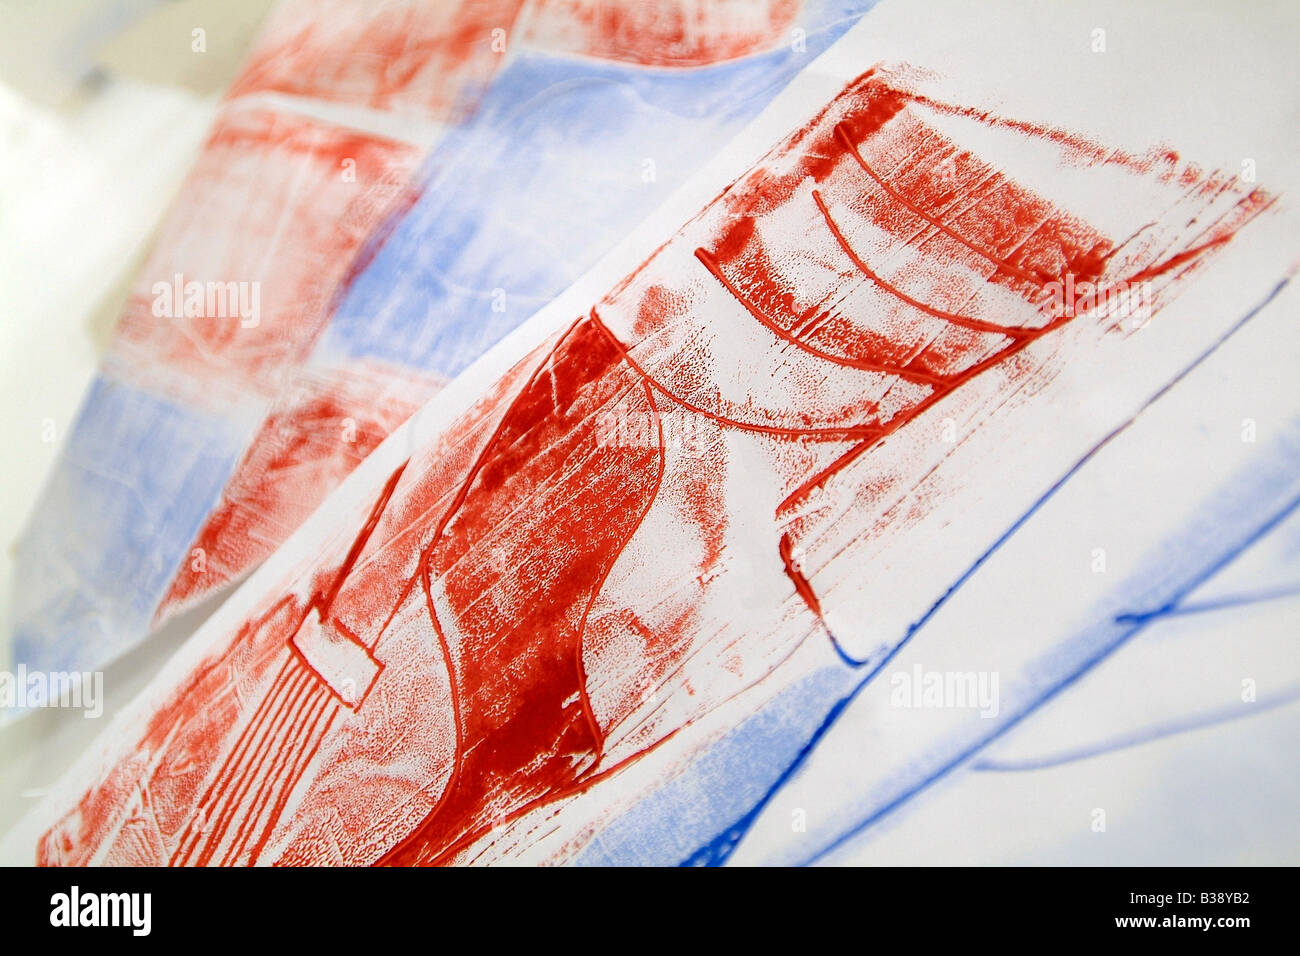 Close-up of red and blue fashion design art Banque D'Images